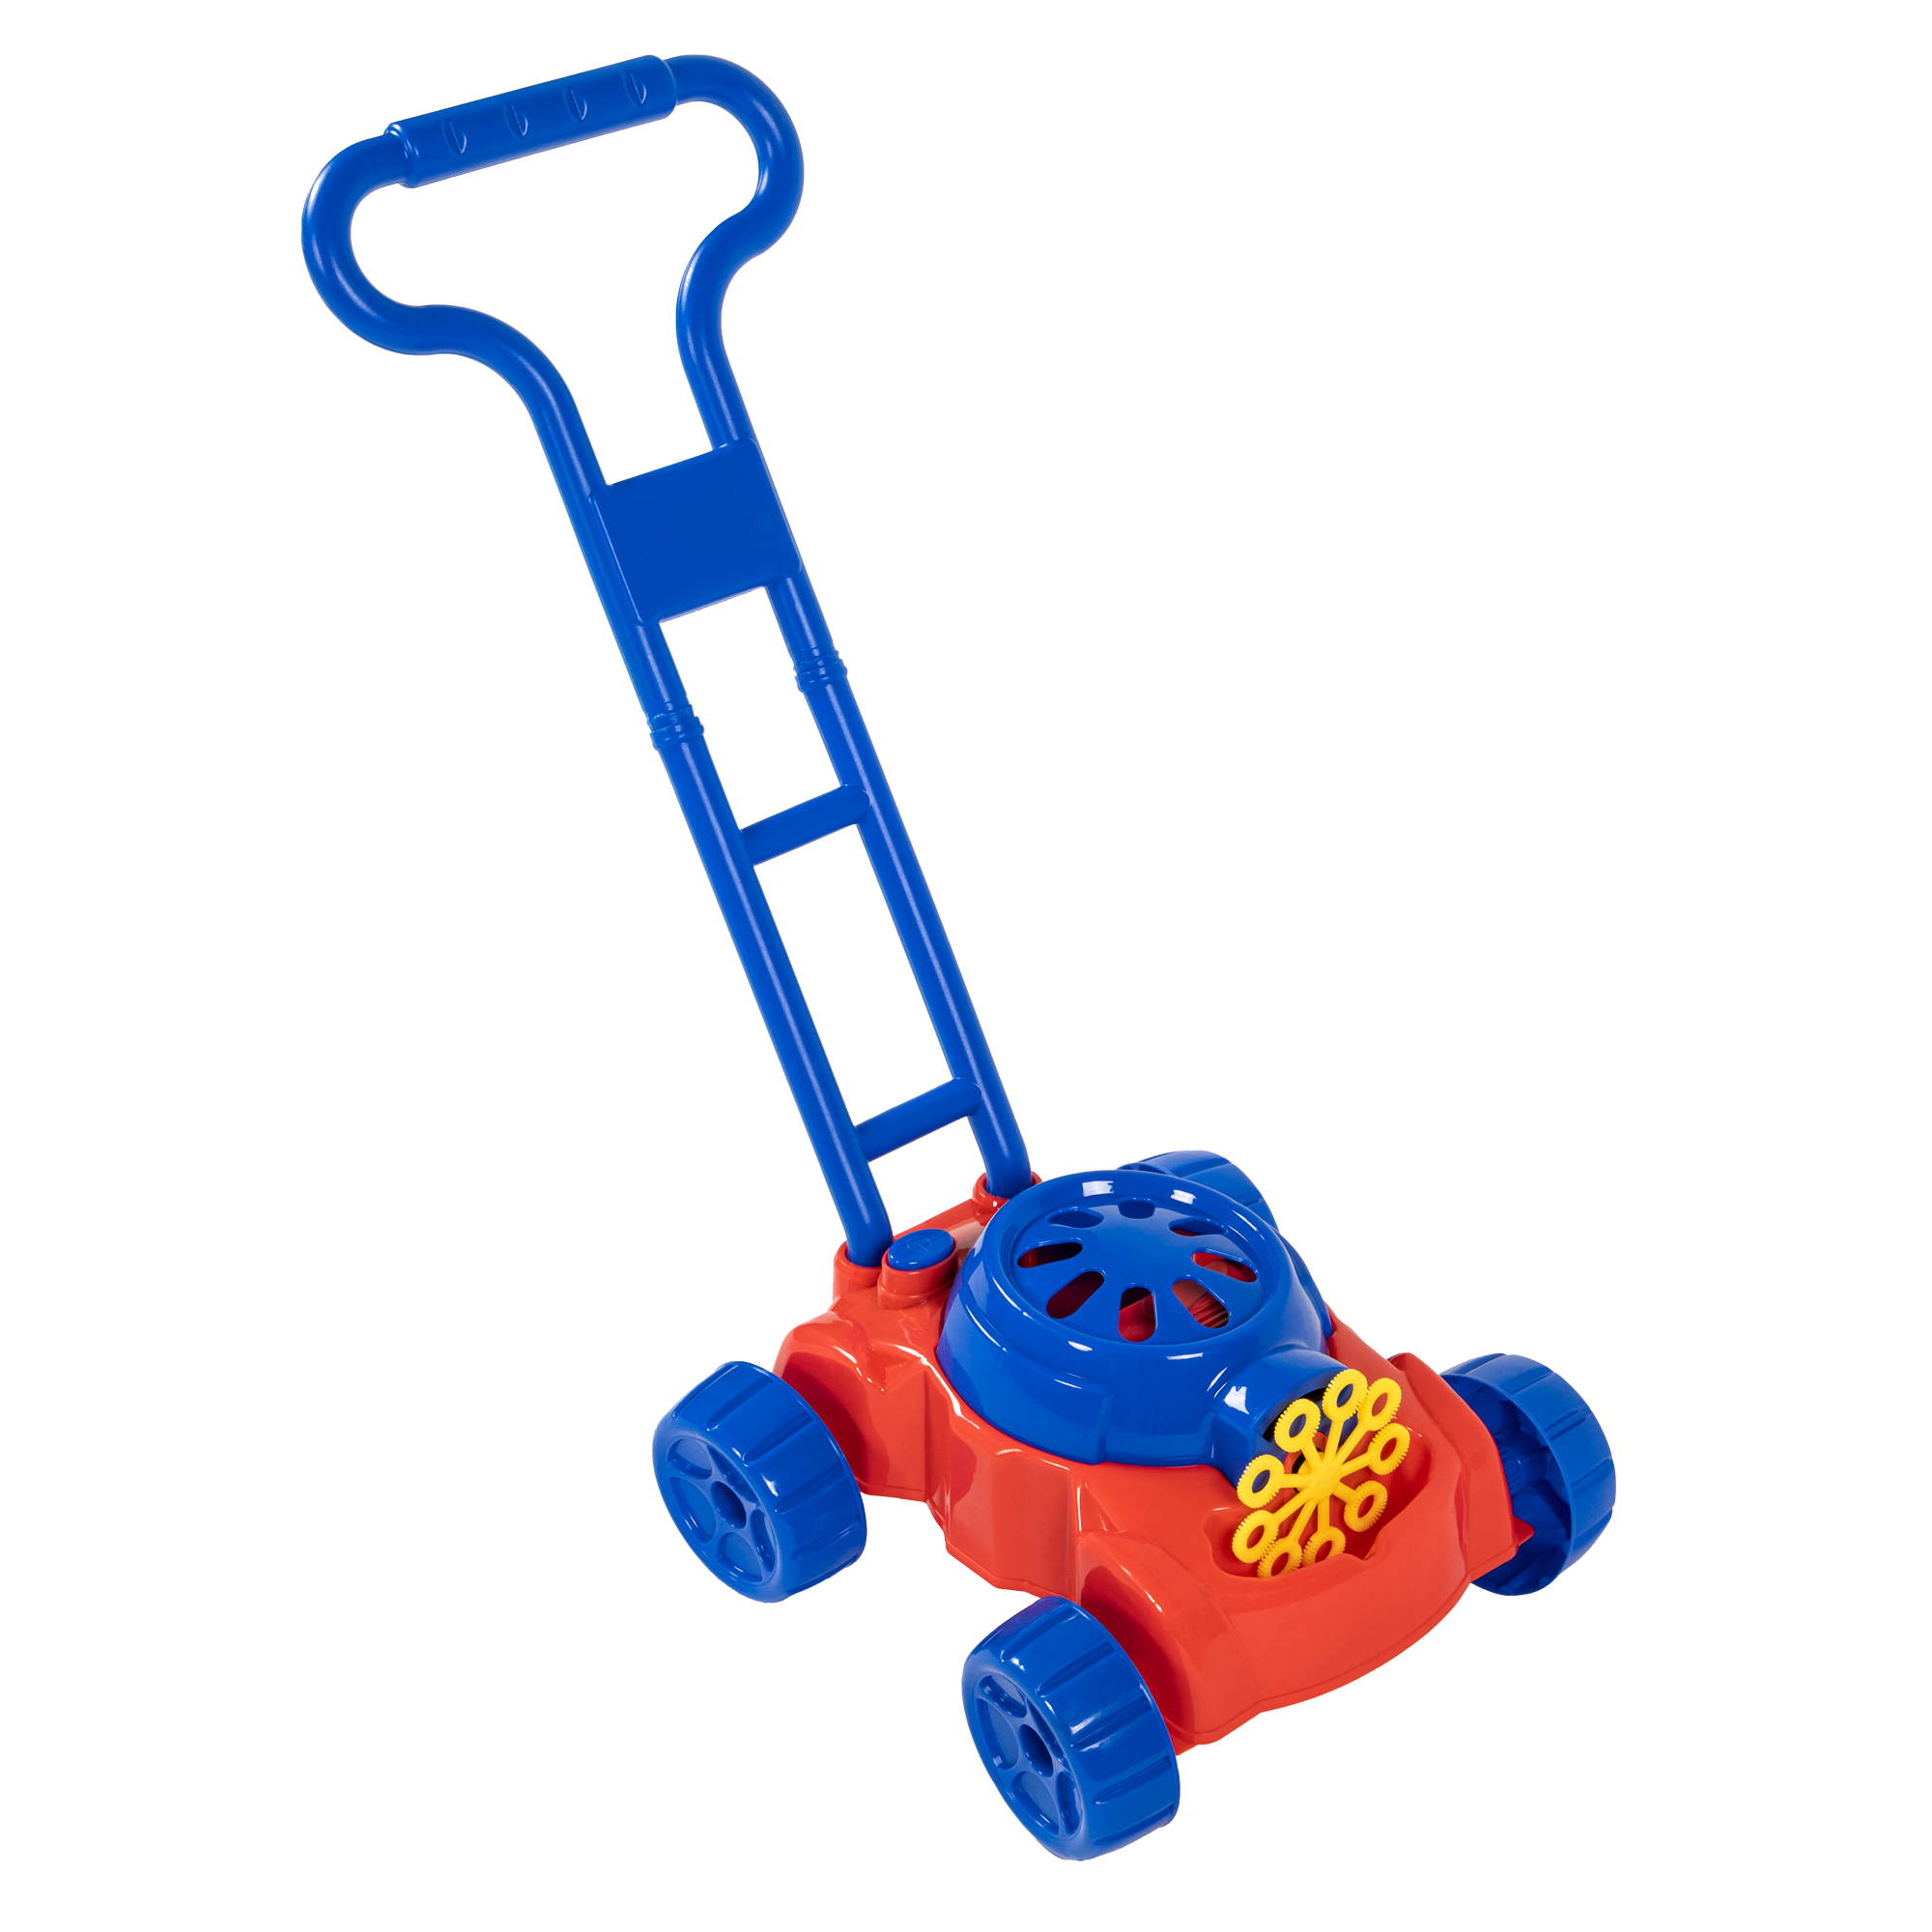 Kids Bubble Lawnmower Bubbles Machine Blower Outdoor Garden Party Toddler Toy